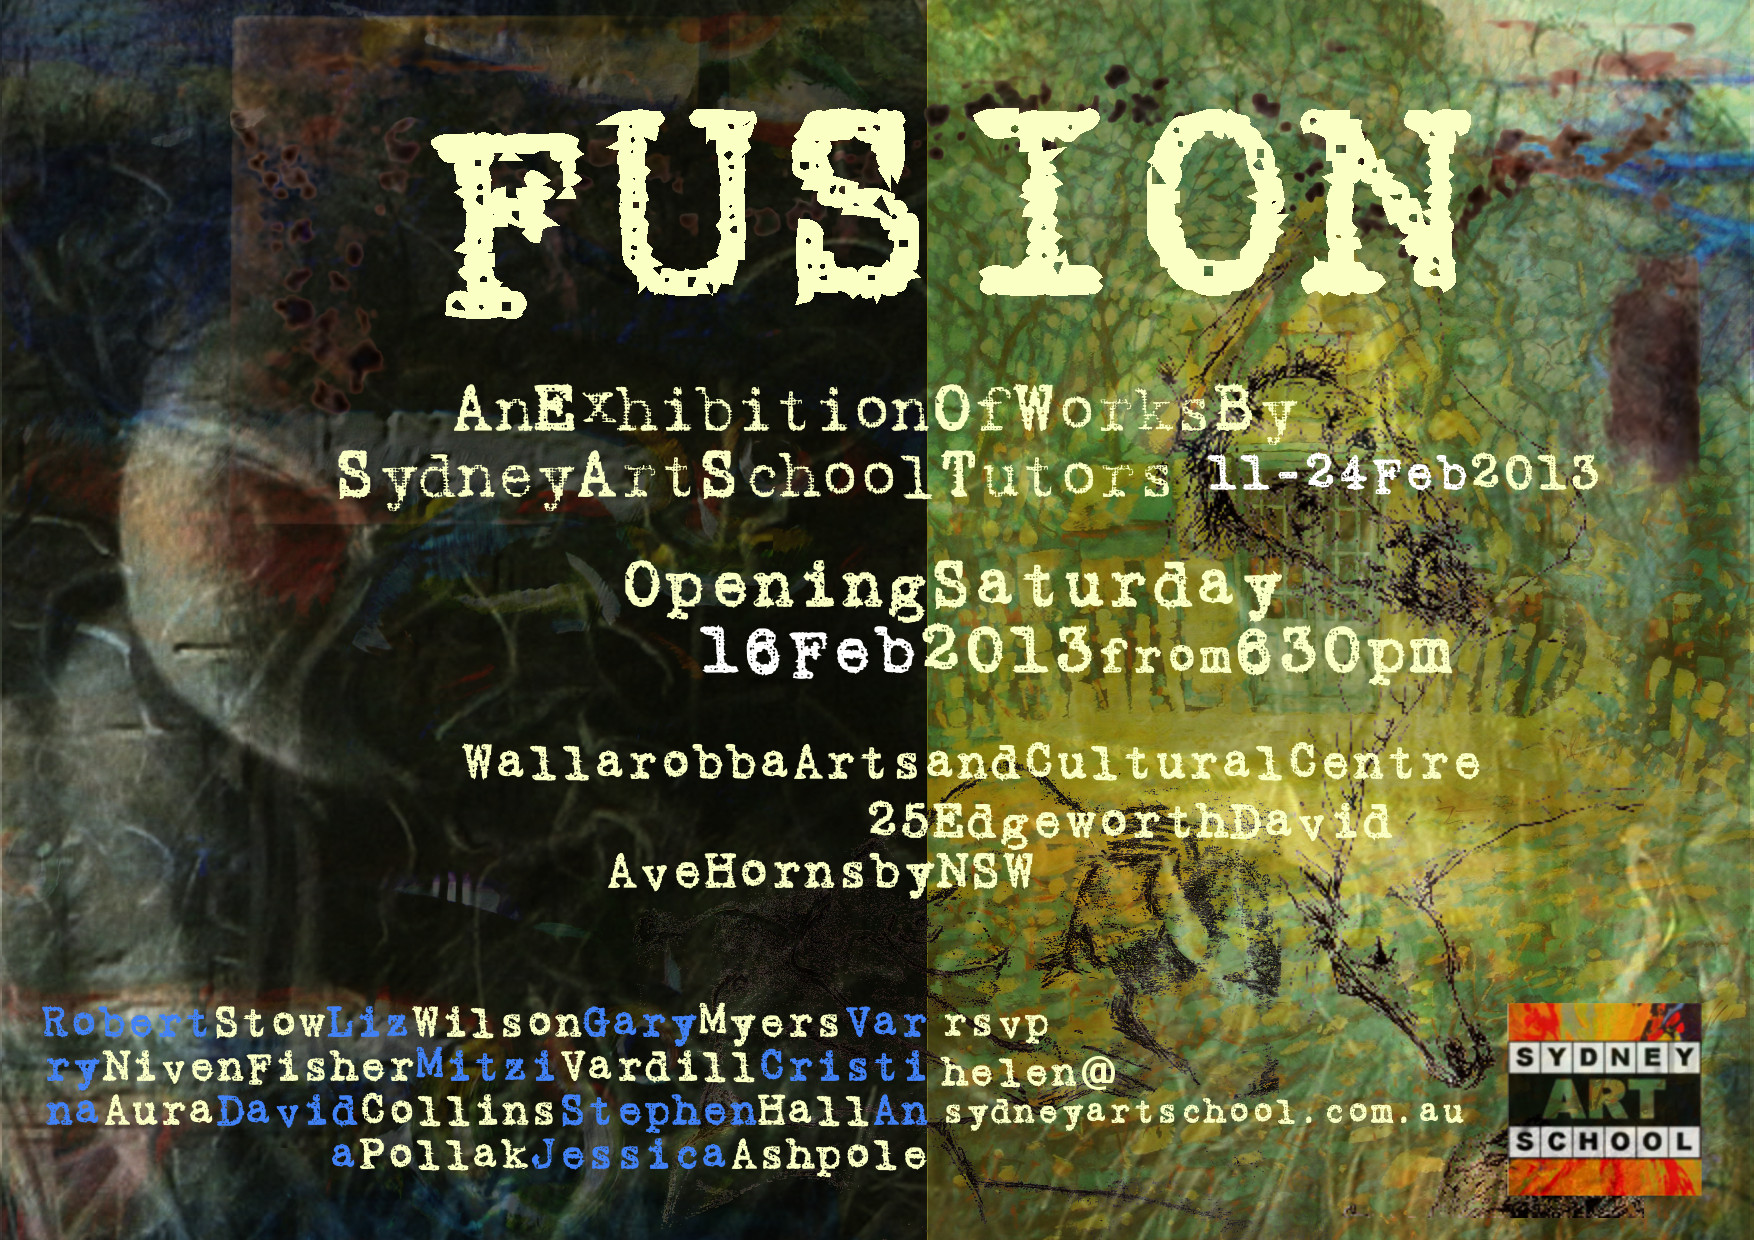 Fusion - An Exhibition of Works by the Tutors of Sydney Art School - Feb 2013